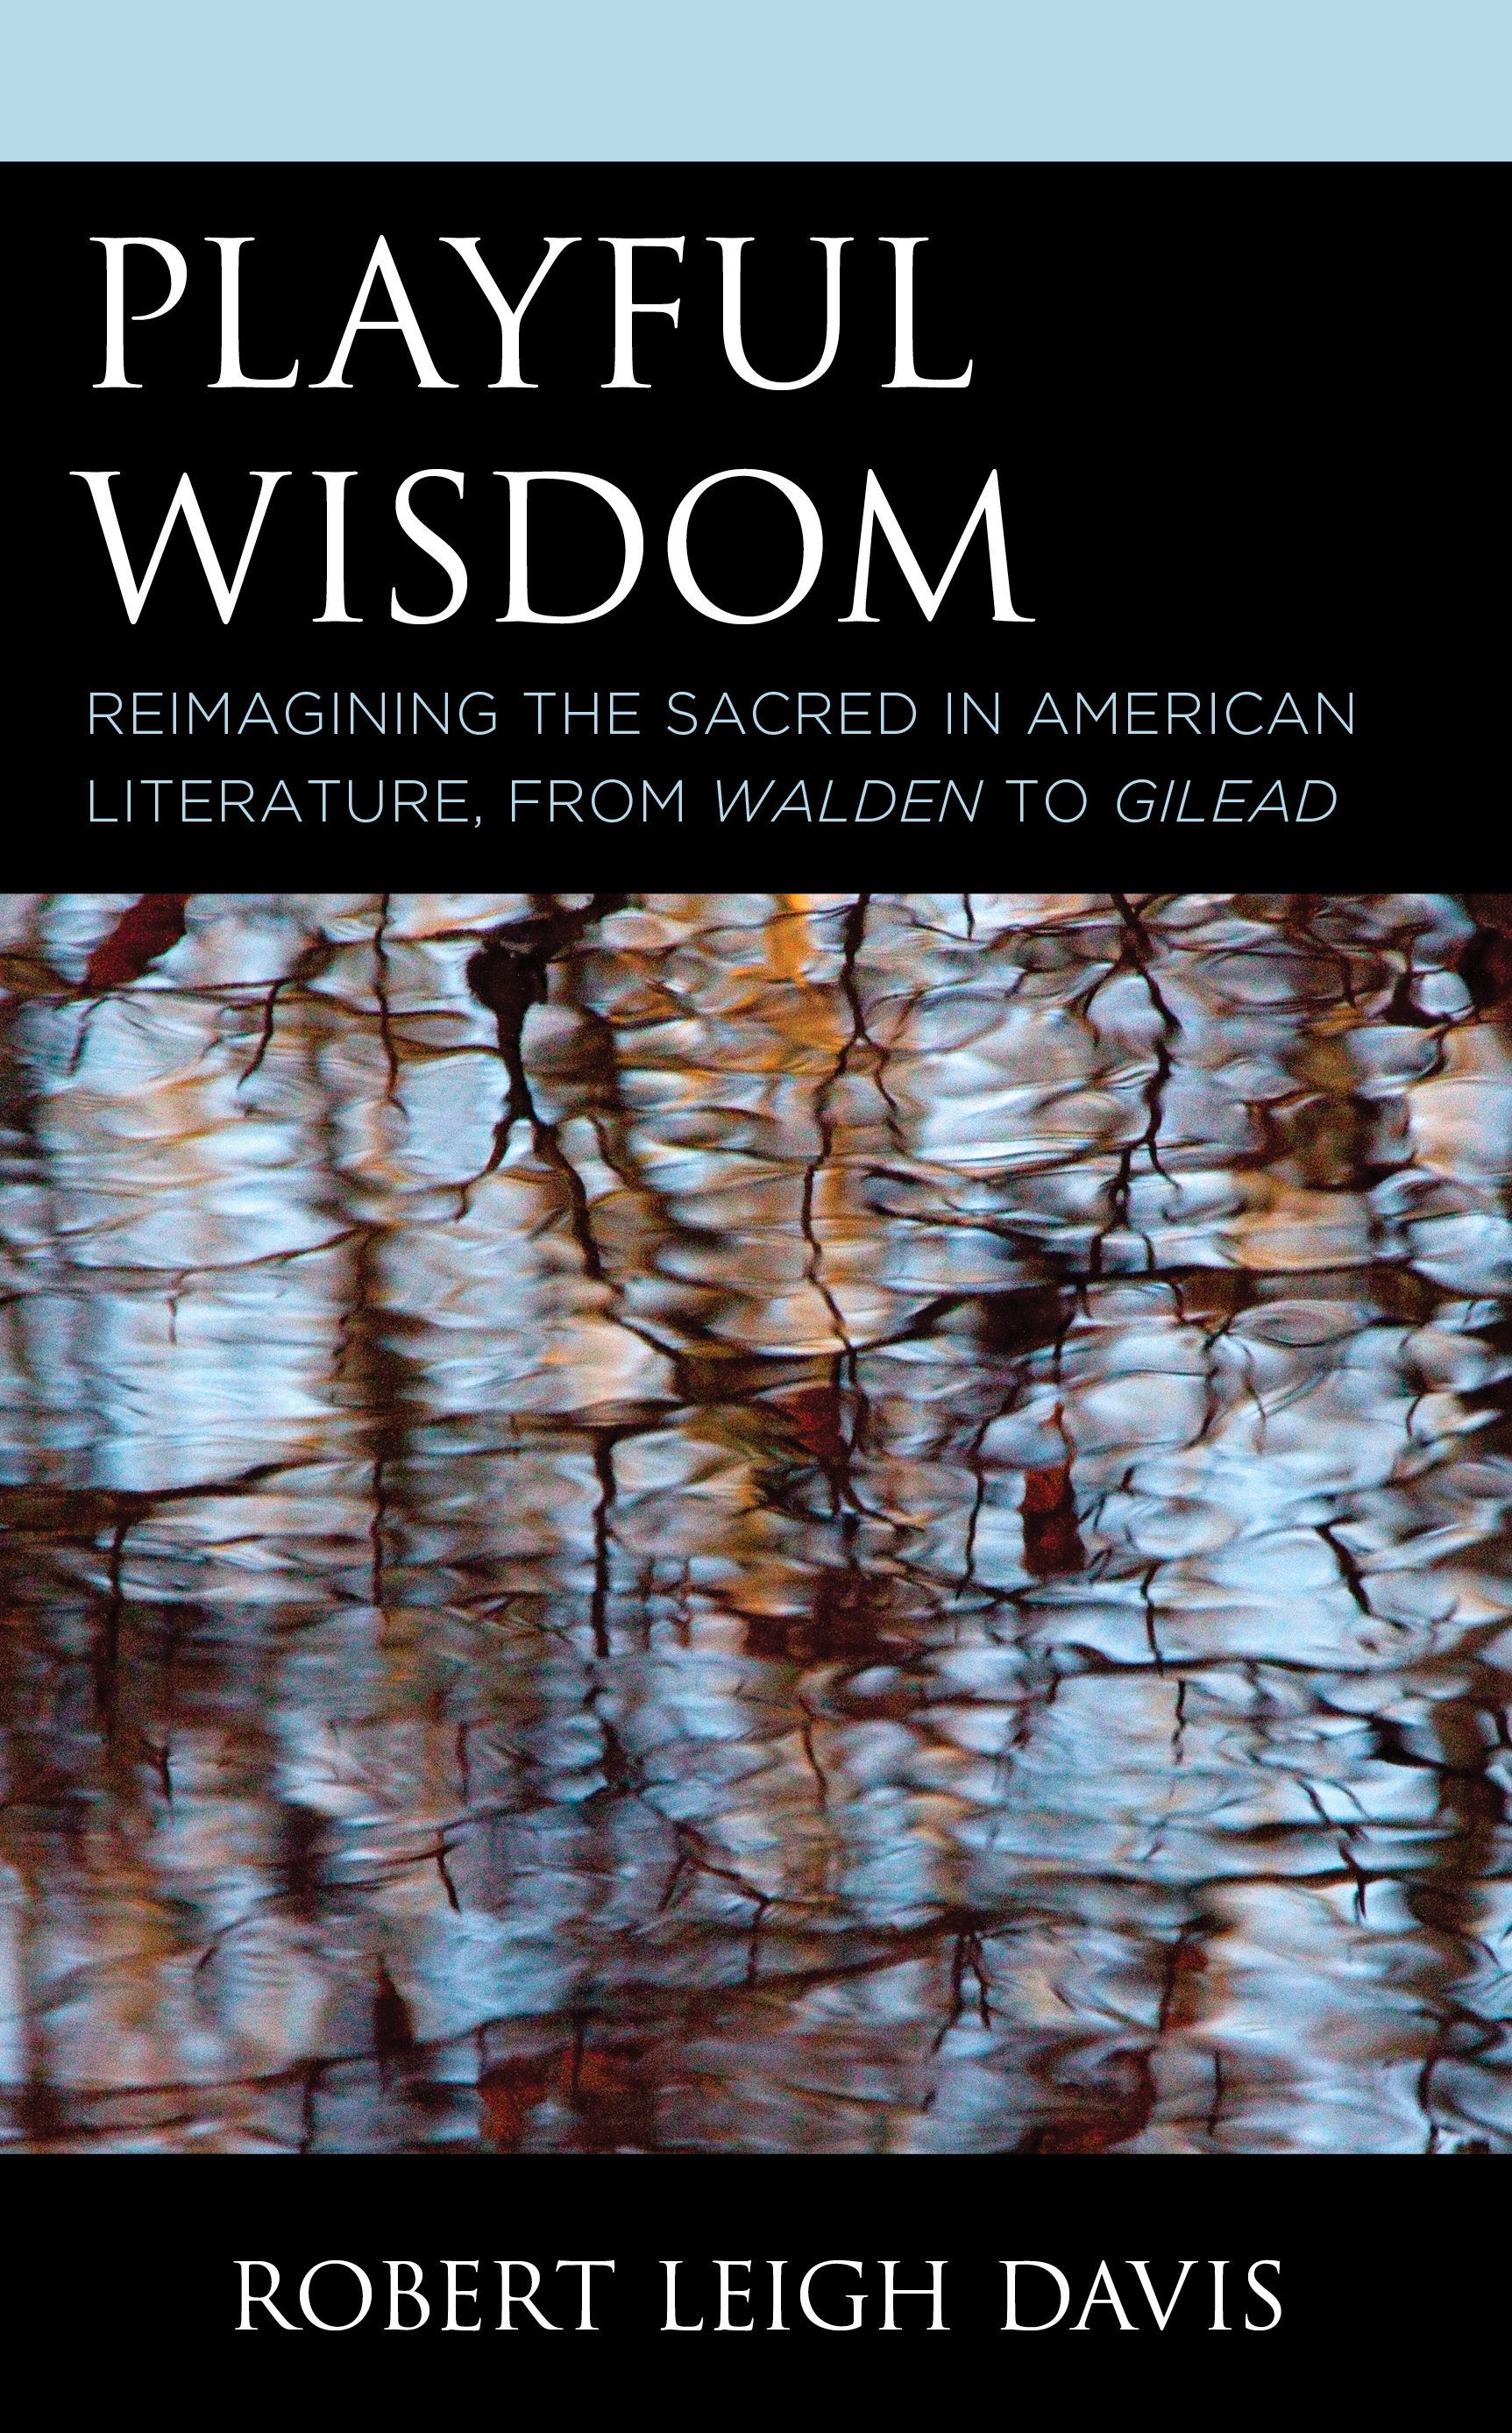 Playful Wisdom: Reimagining the Sacred in American Literature, from Walden to Gilead